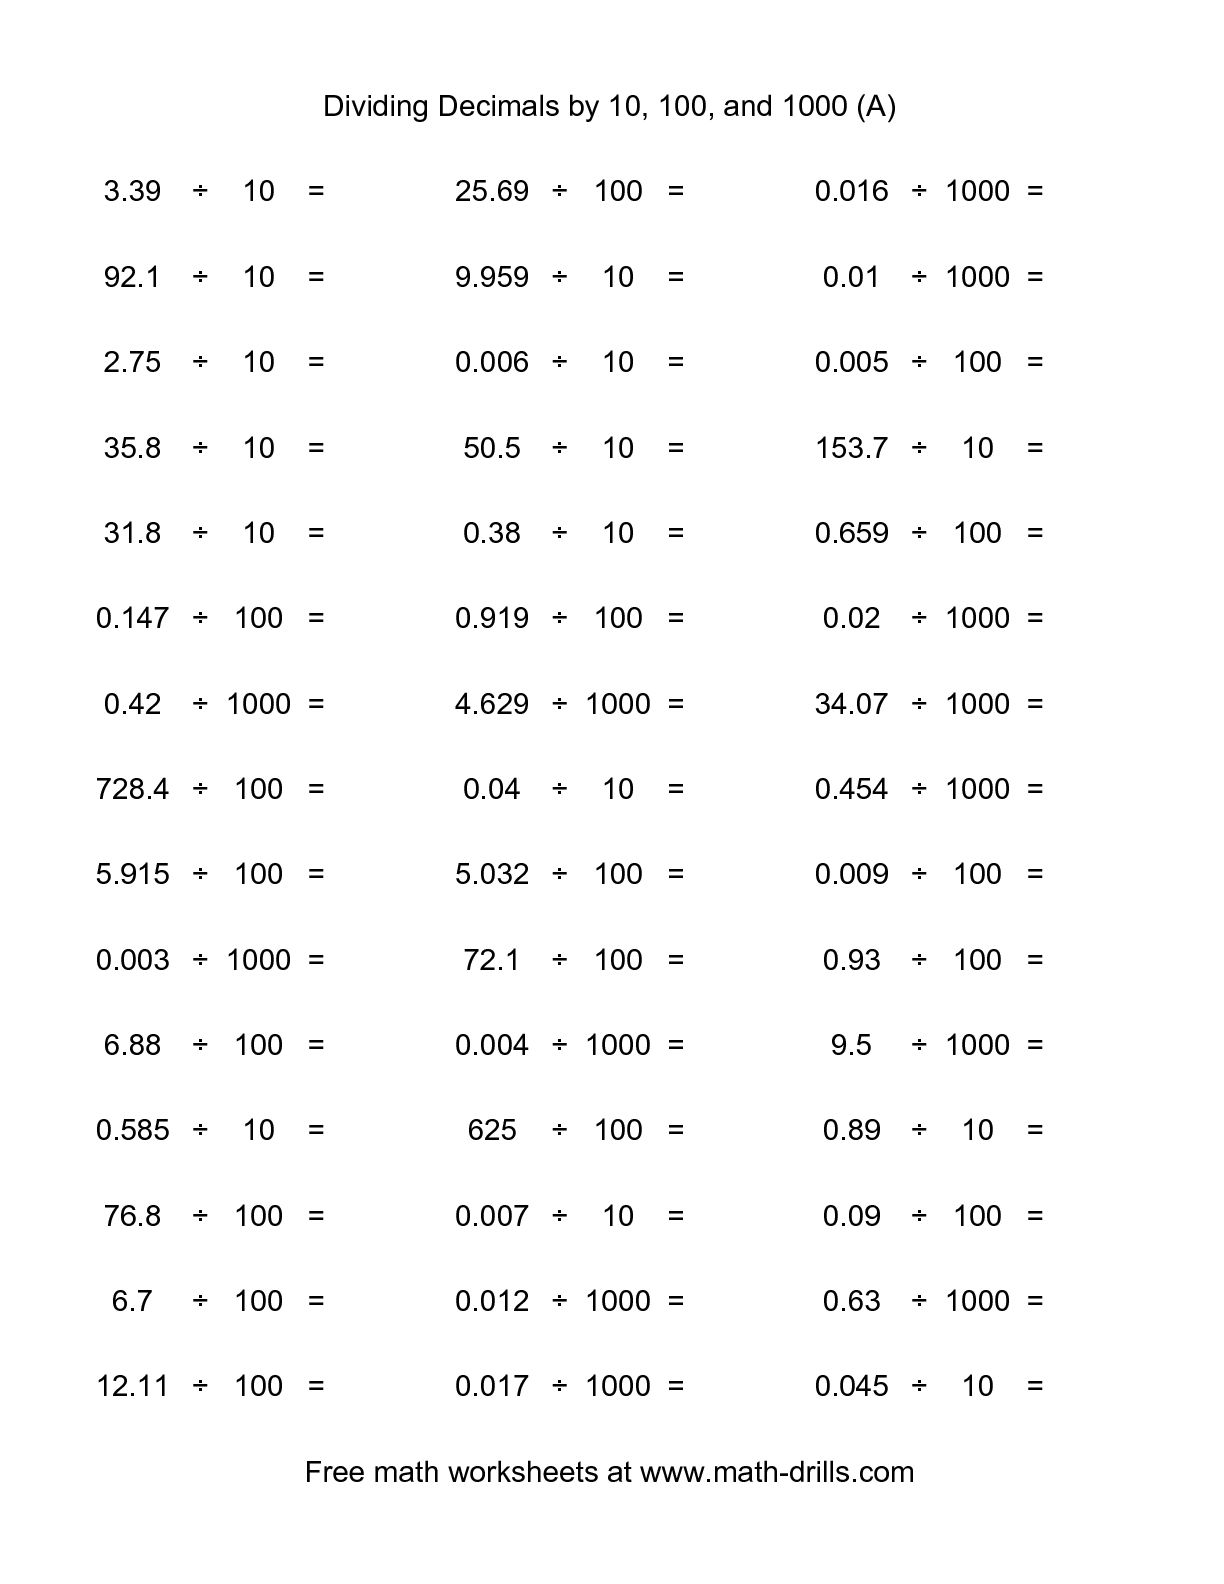 Dividing Whole Numbers By 10 100 And 1000 Worksheet Pdf